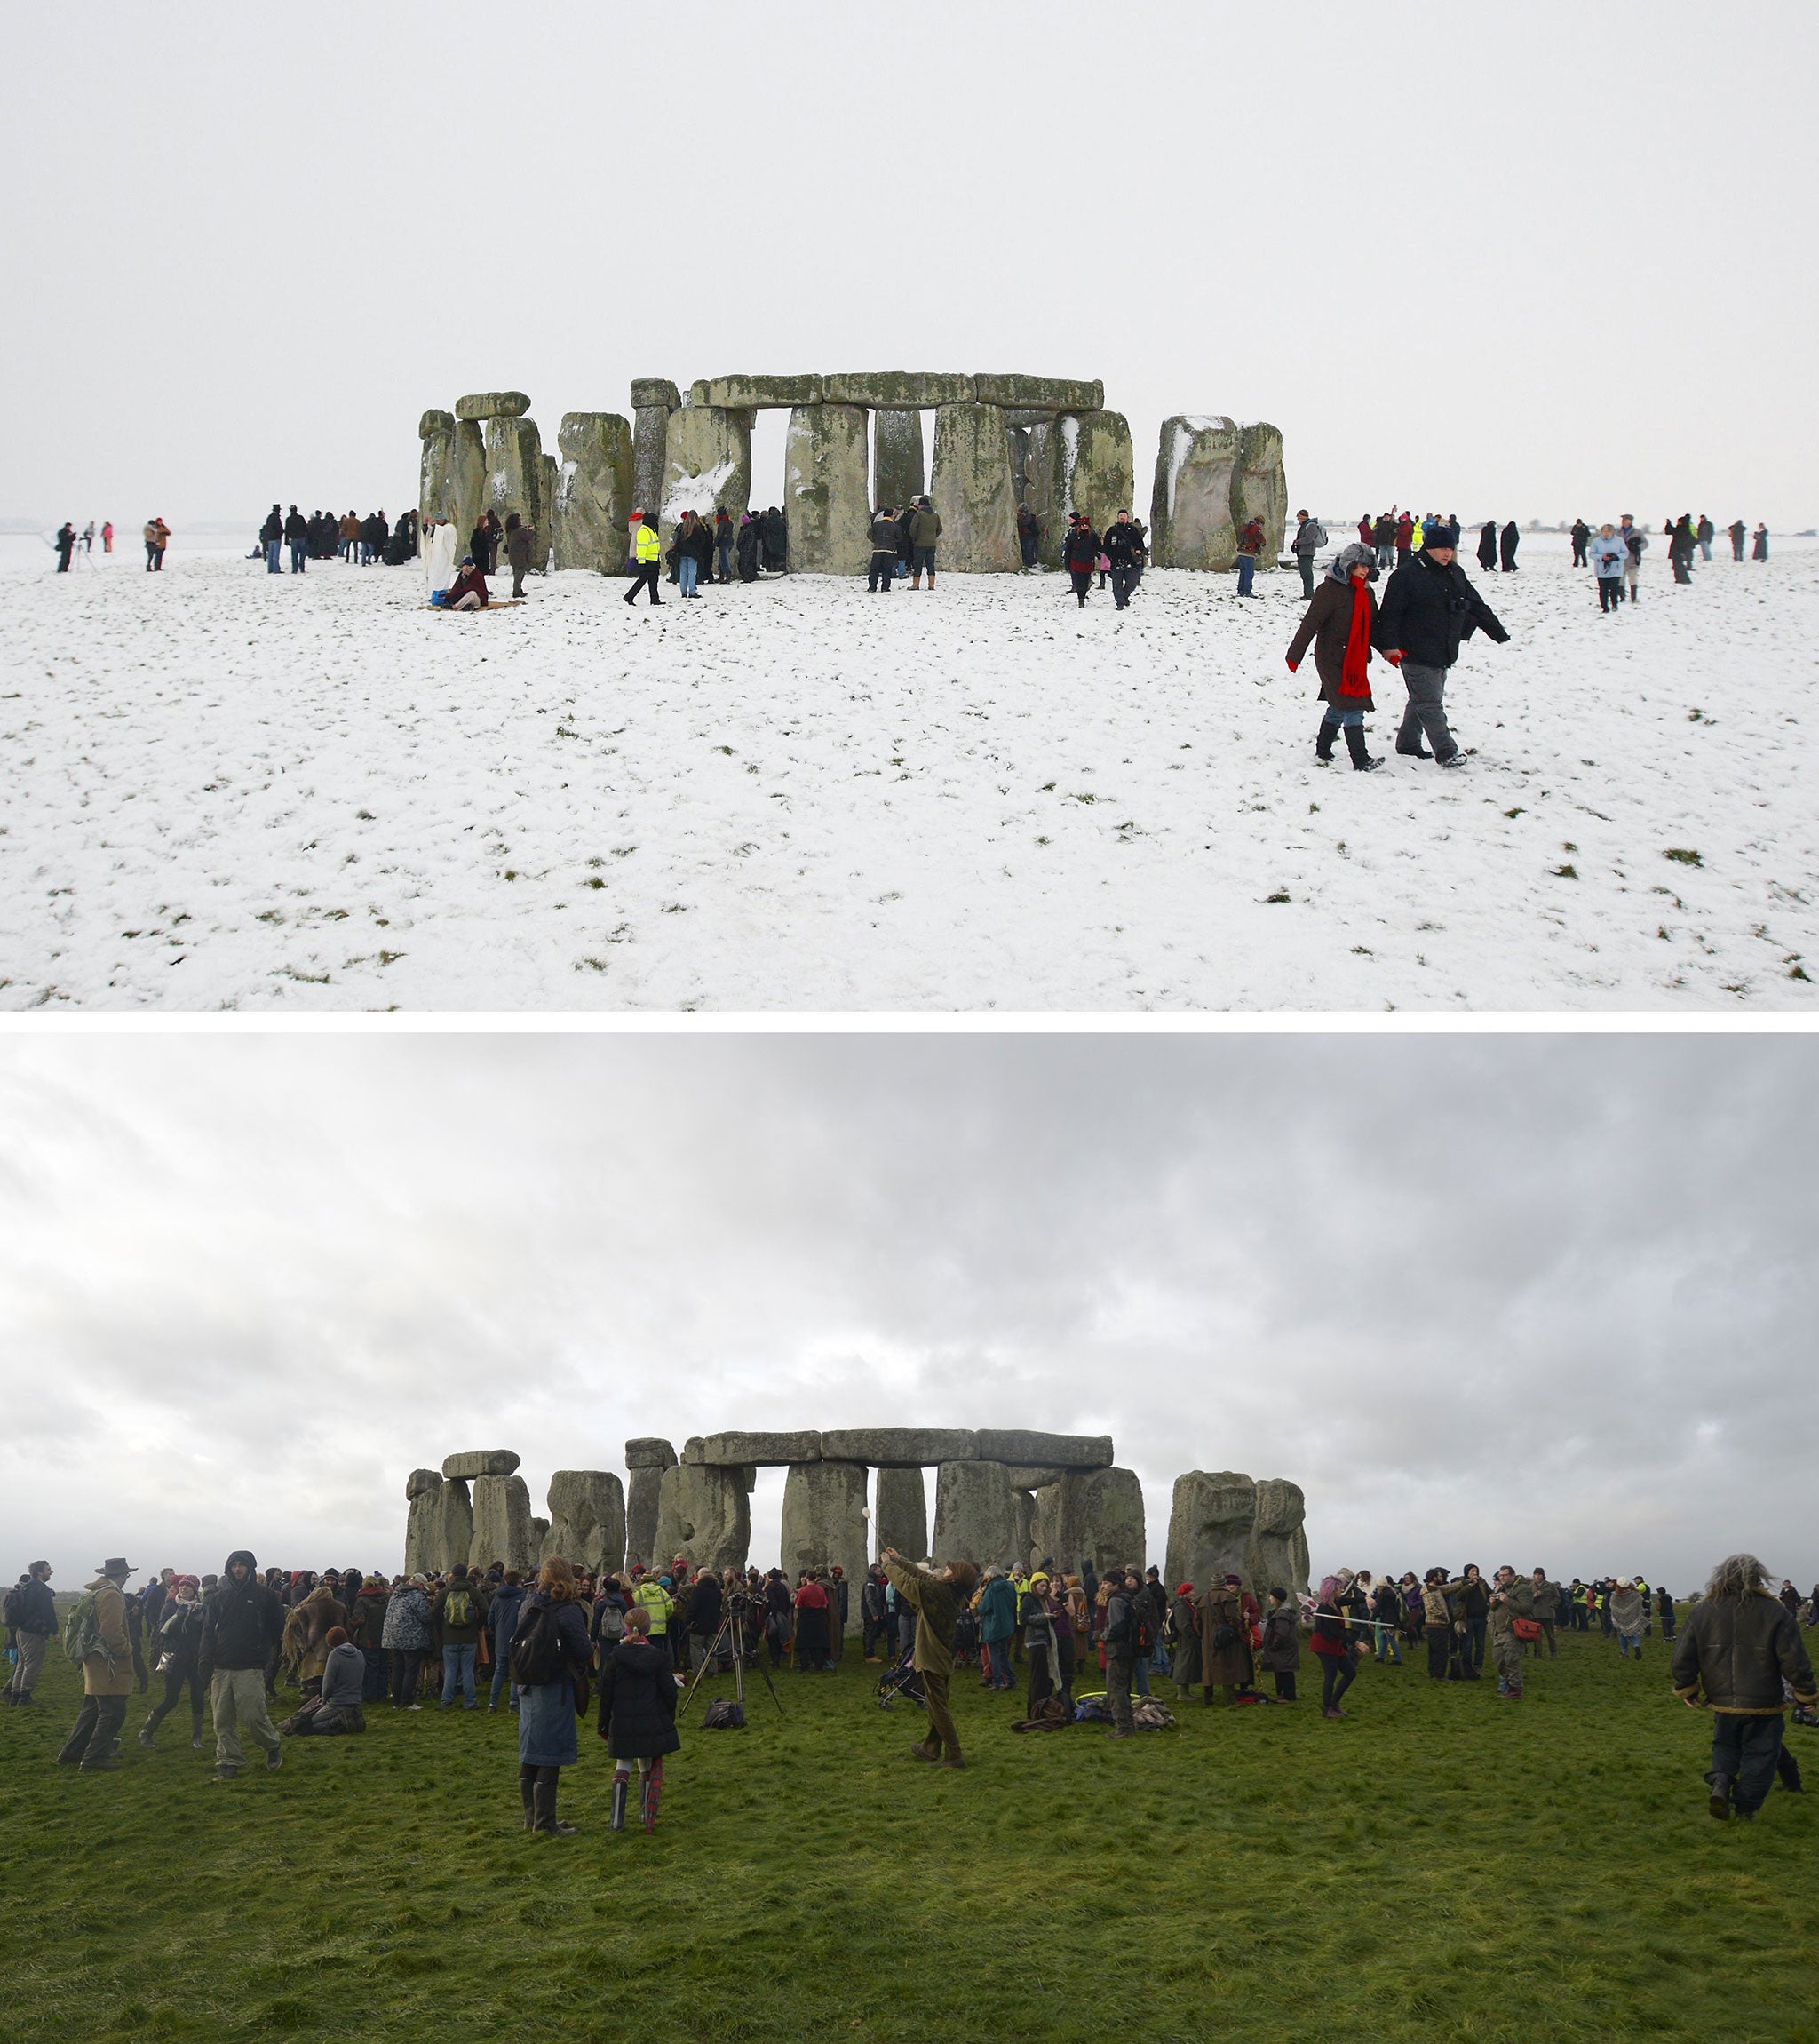 Composite images of Stonehenge in Wiltshire during a snowy Winter Solstice dated 22/12/10 (top) and the Winter Solstice today (below) (via PA)